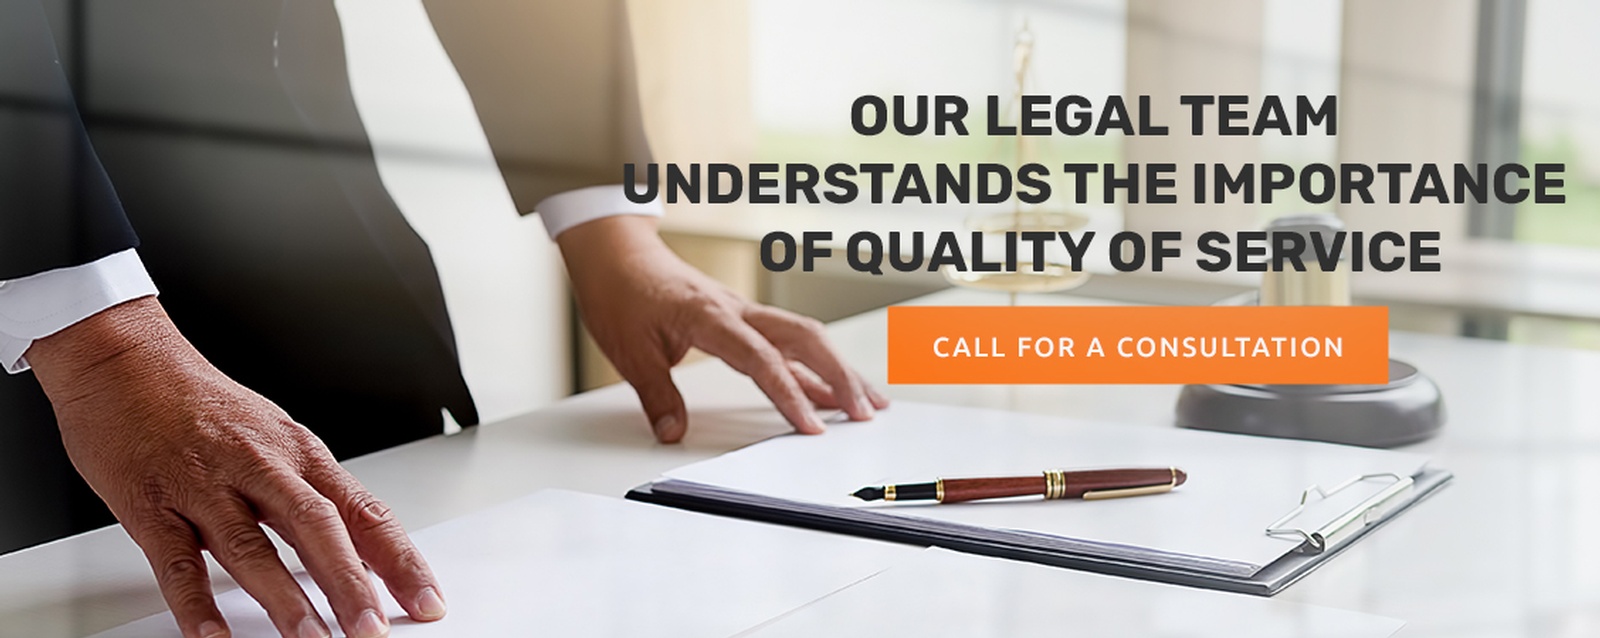 Our Legal Team Understands The Importance Of Quality Of Service